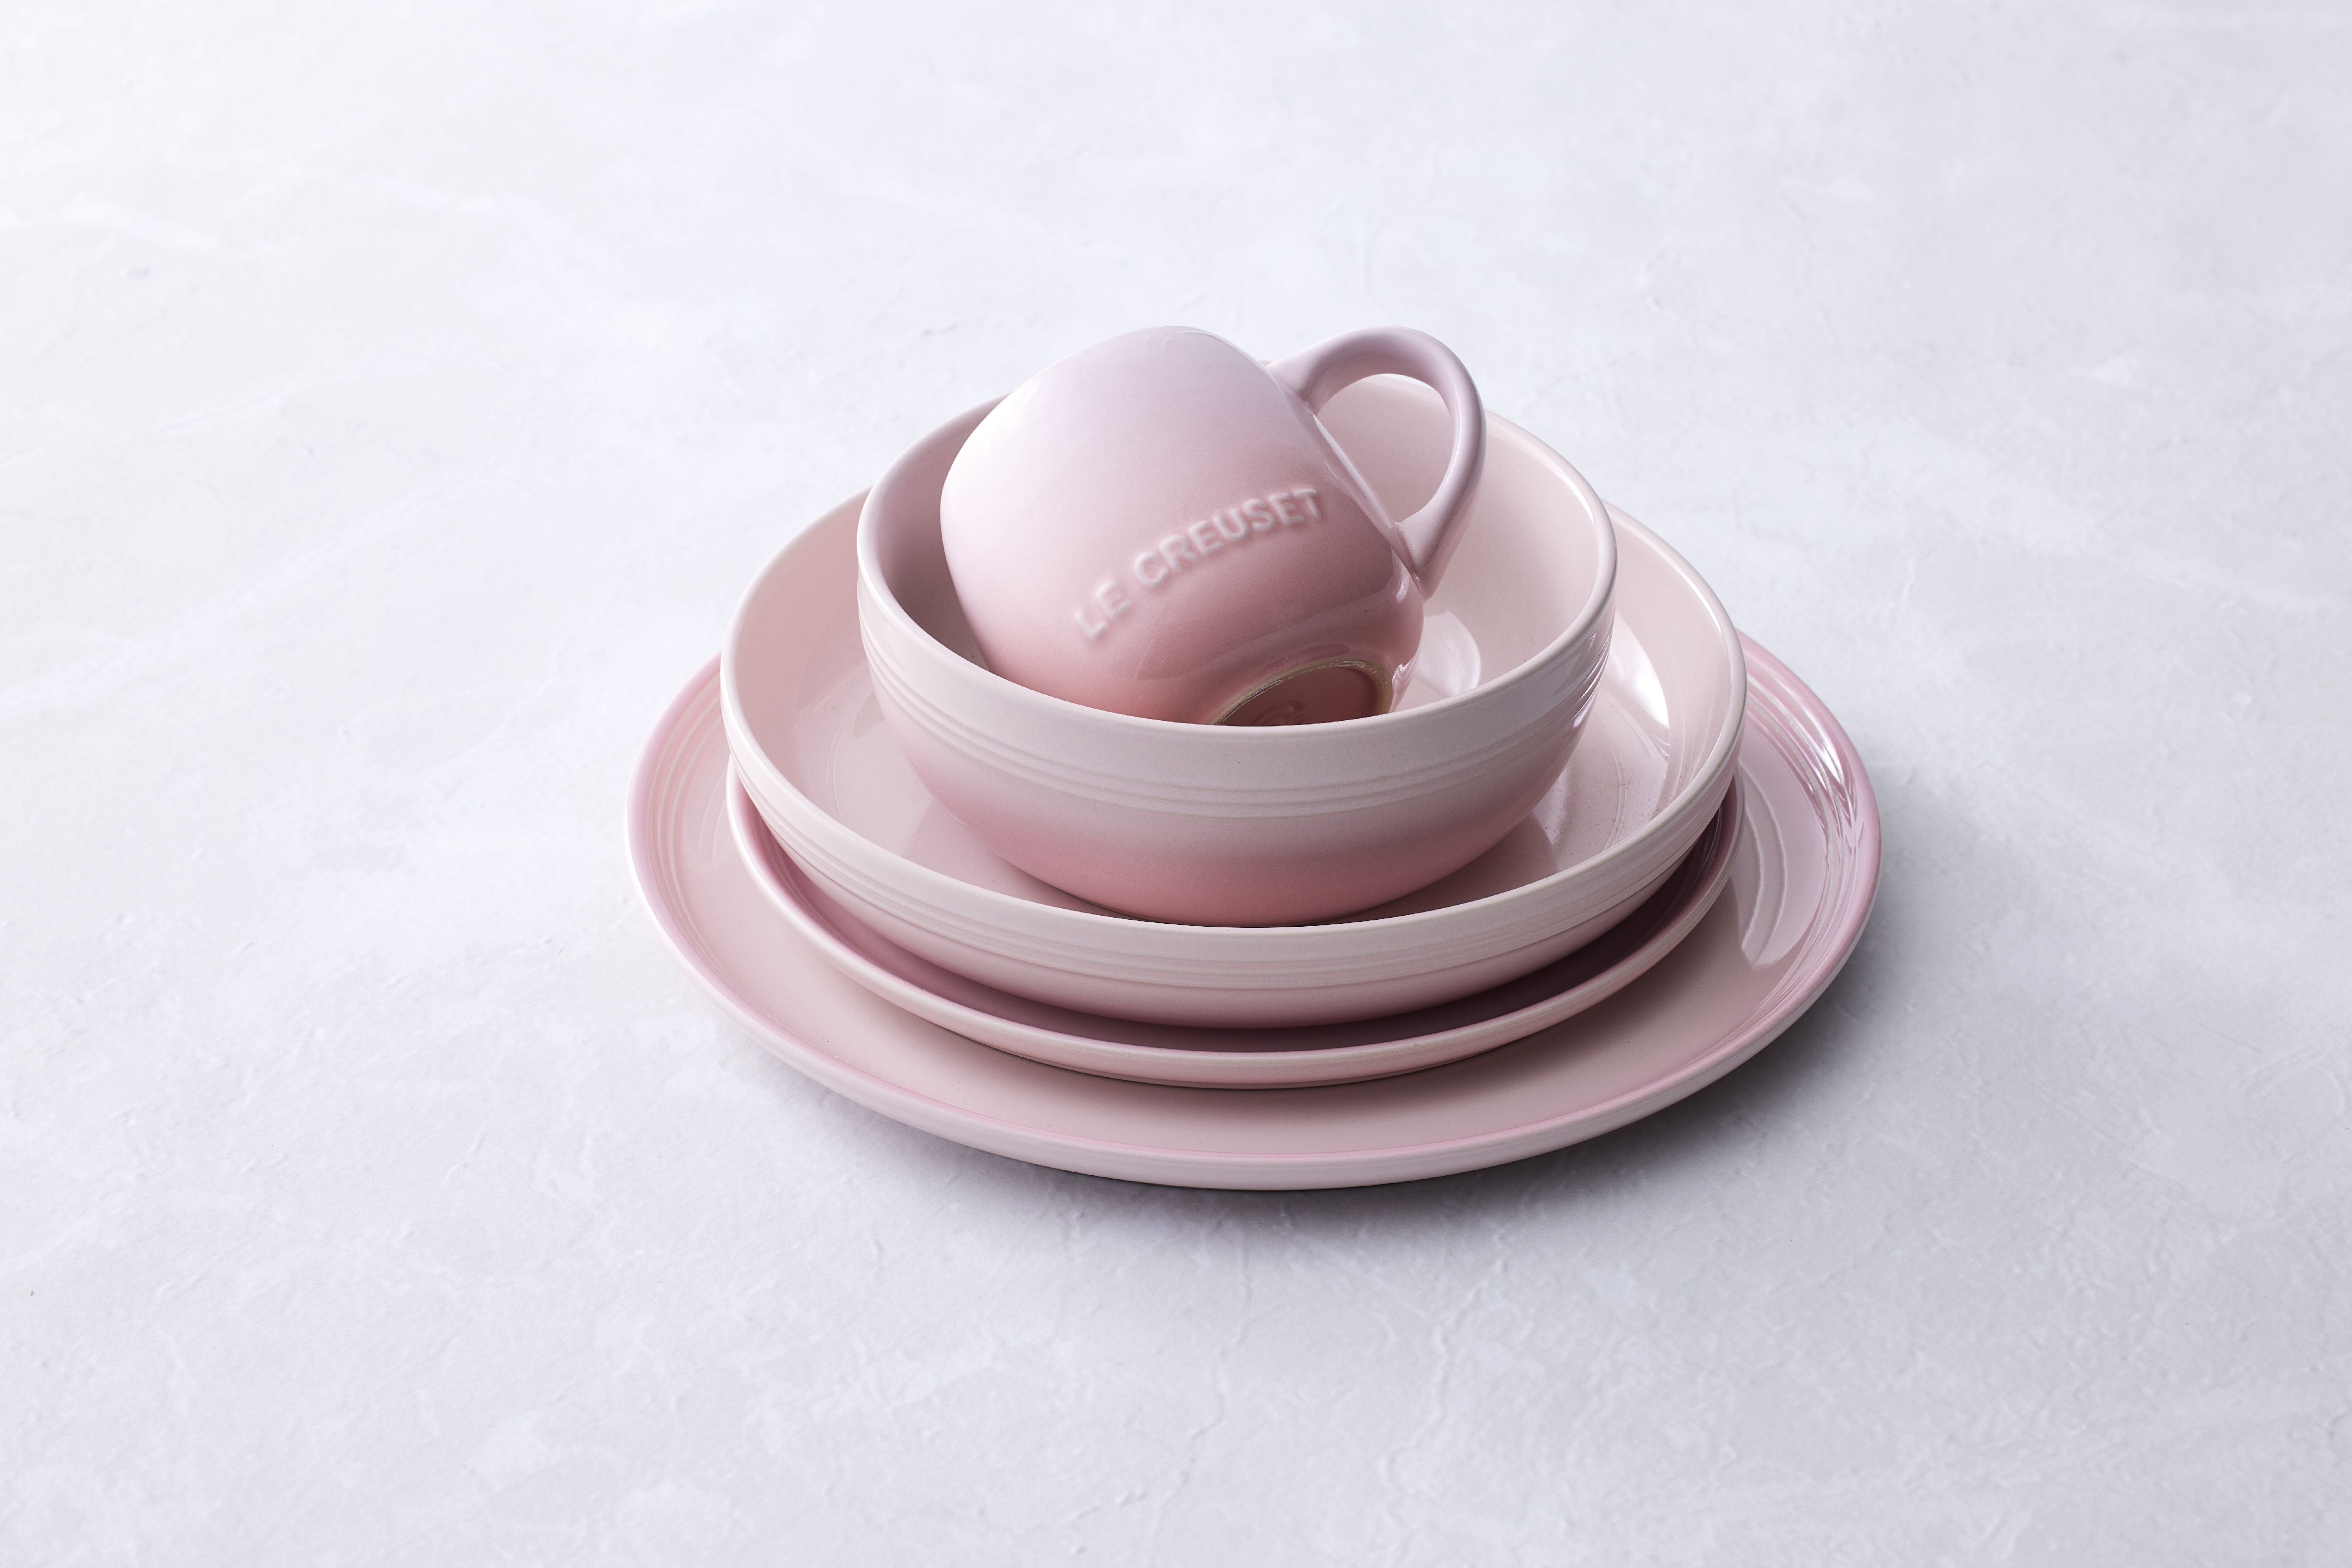 Le creuset coupe krus, shell pink